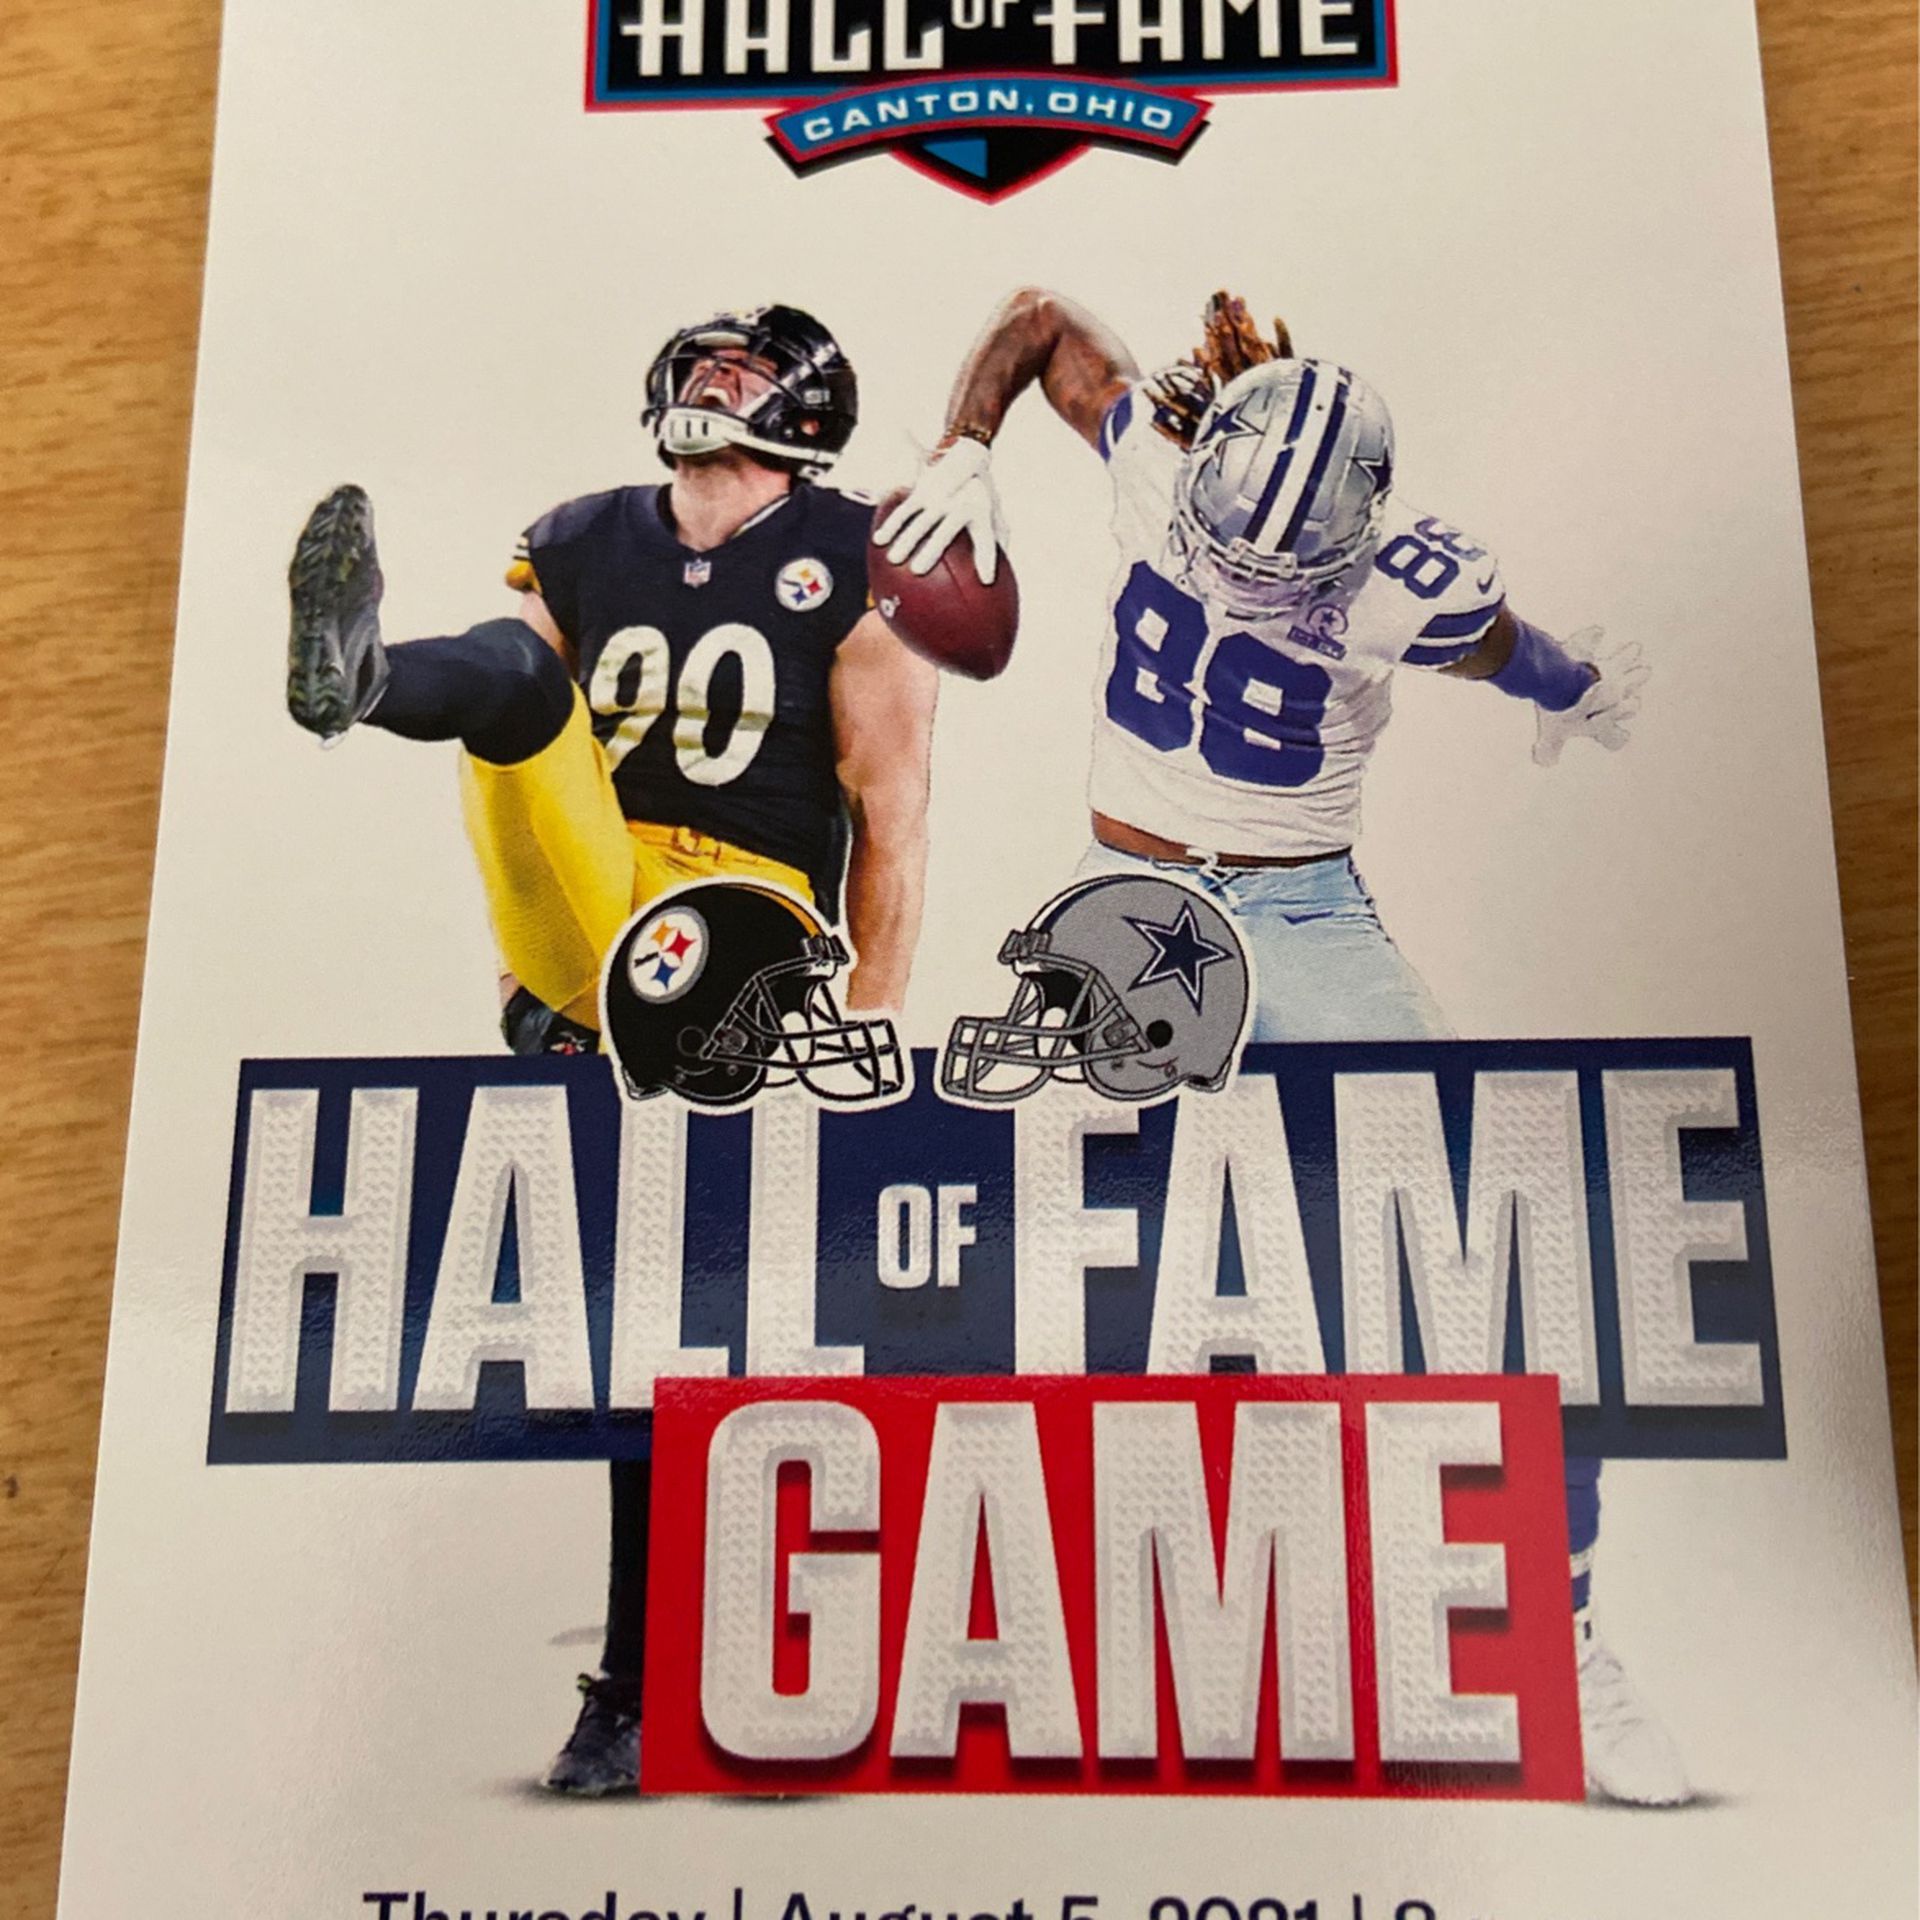 NFL HALL OF FAME GAME TICKETS